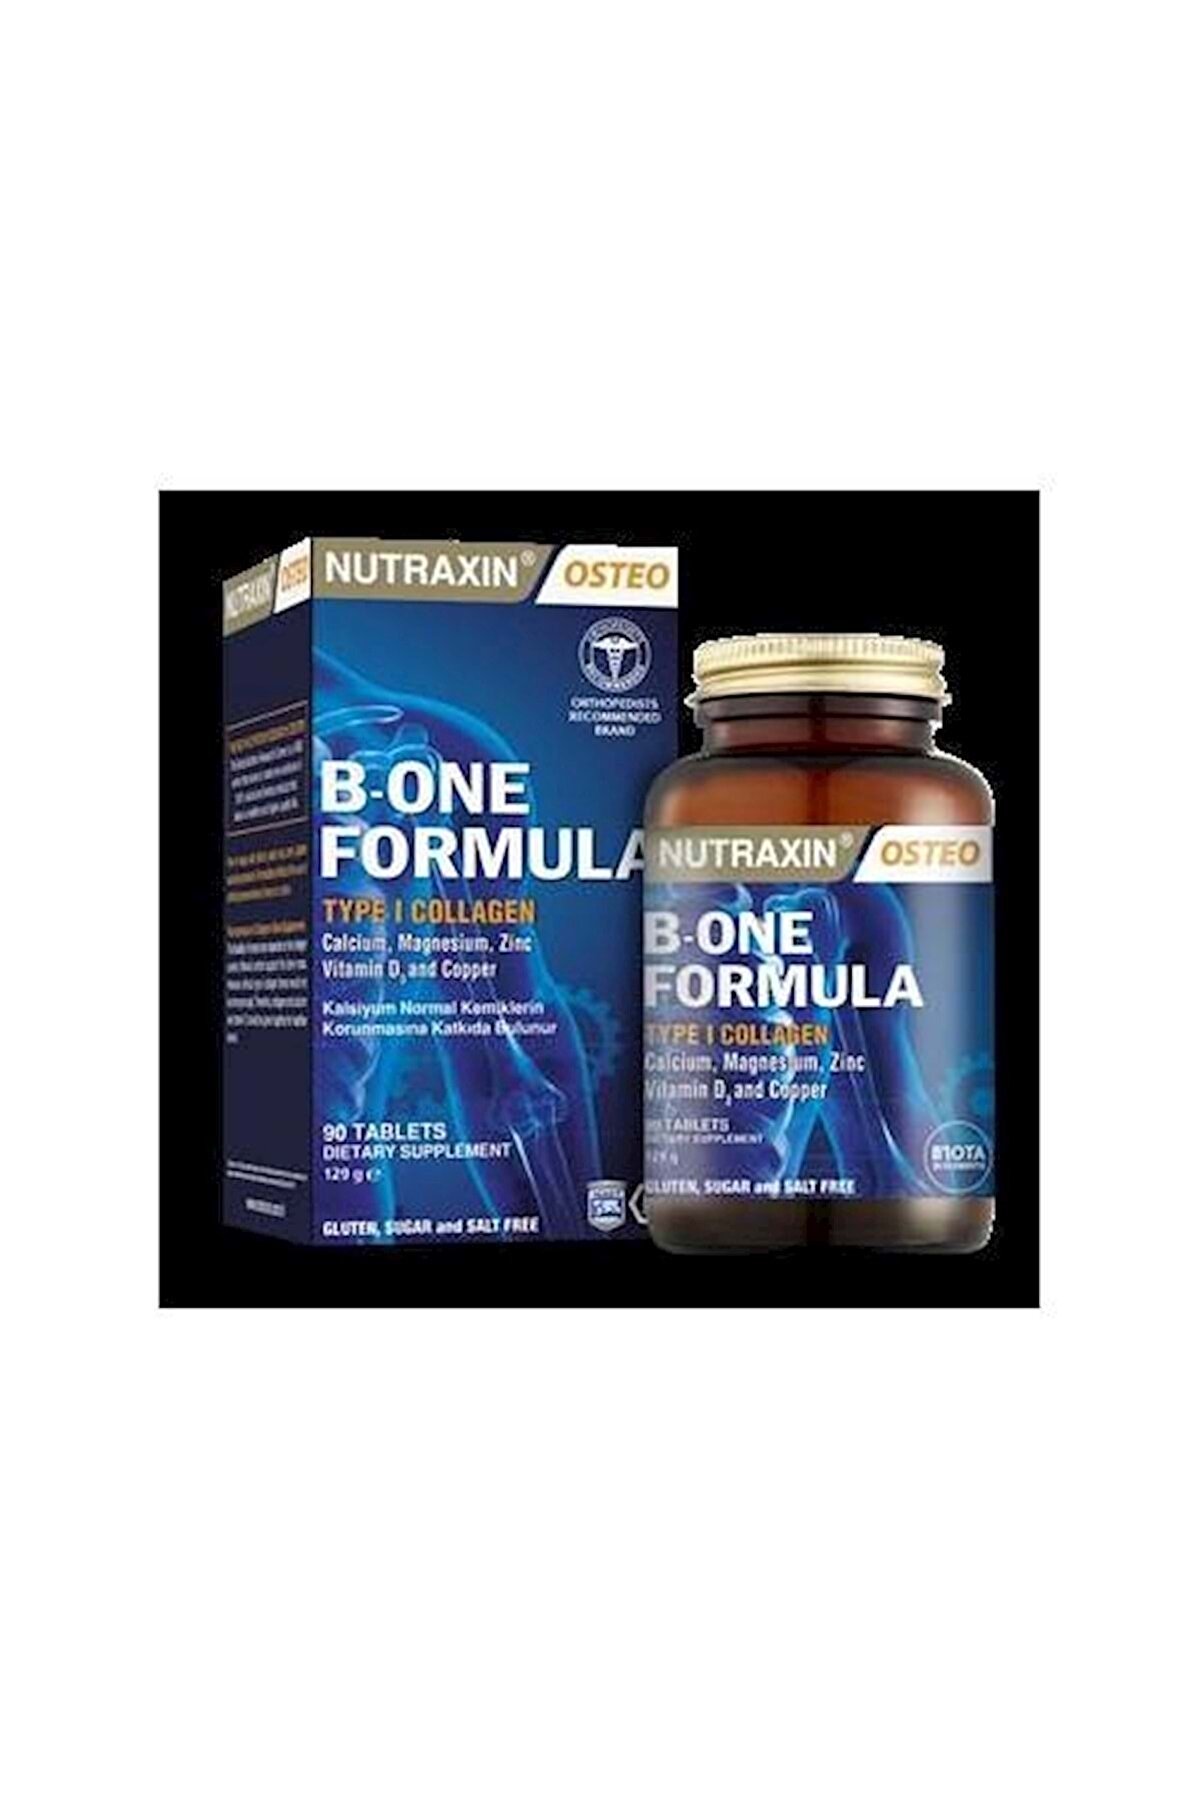 Nutraxin Osteo B-one Formula Type1 Collagen 90 Tablet